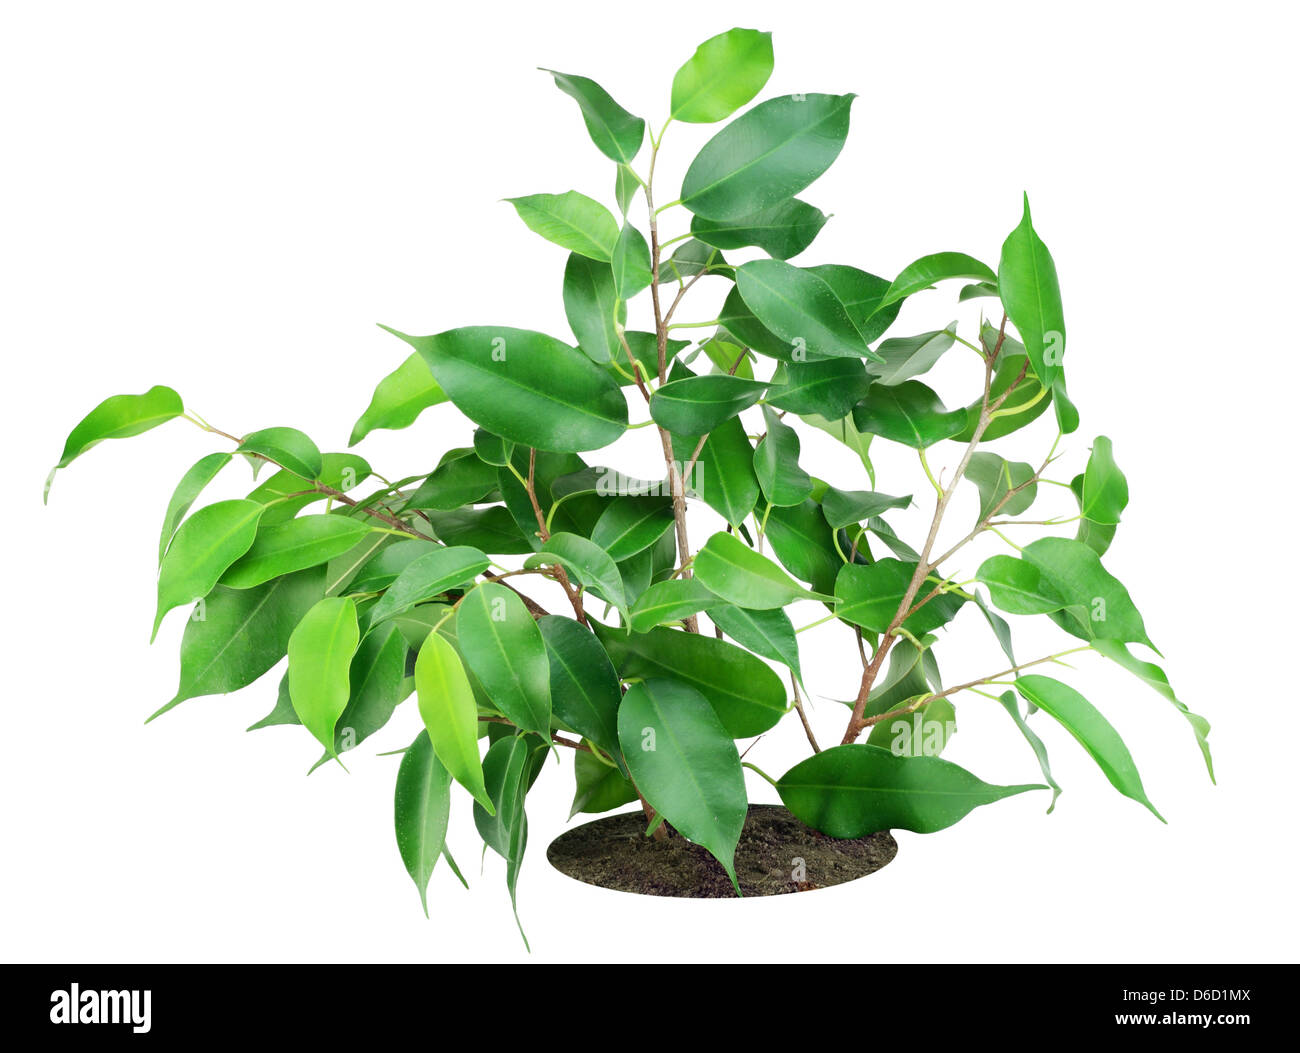 Favourite indoor plant Ficus on bed Stock Photo